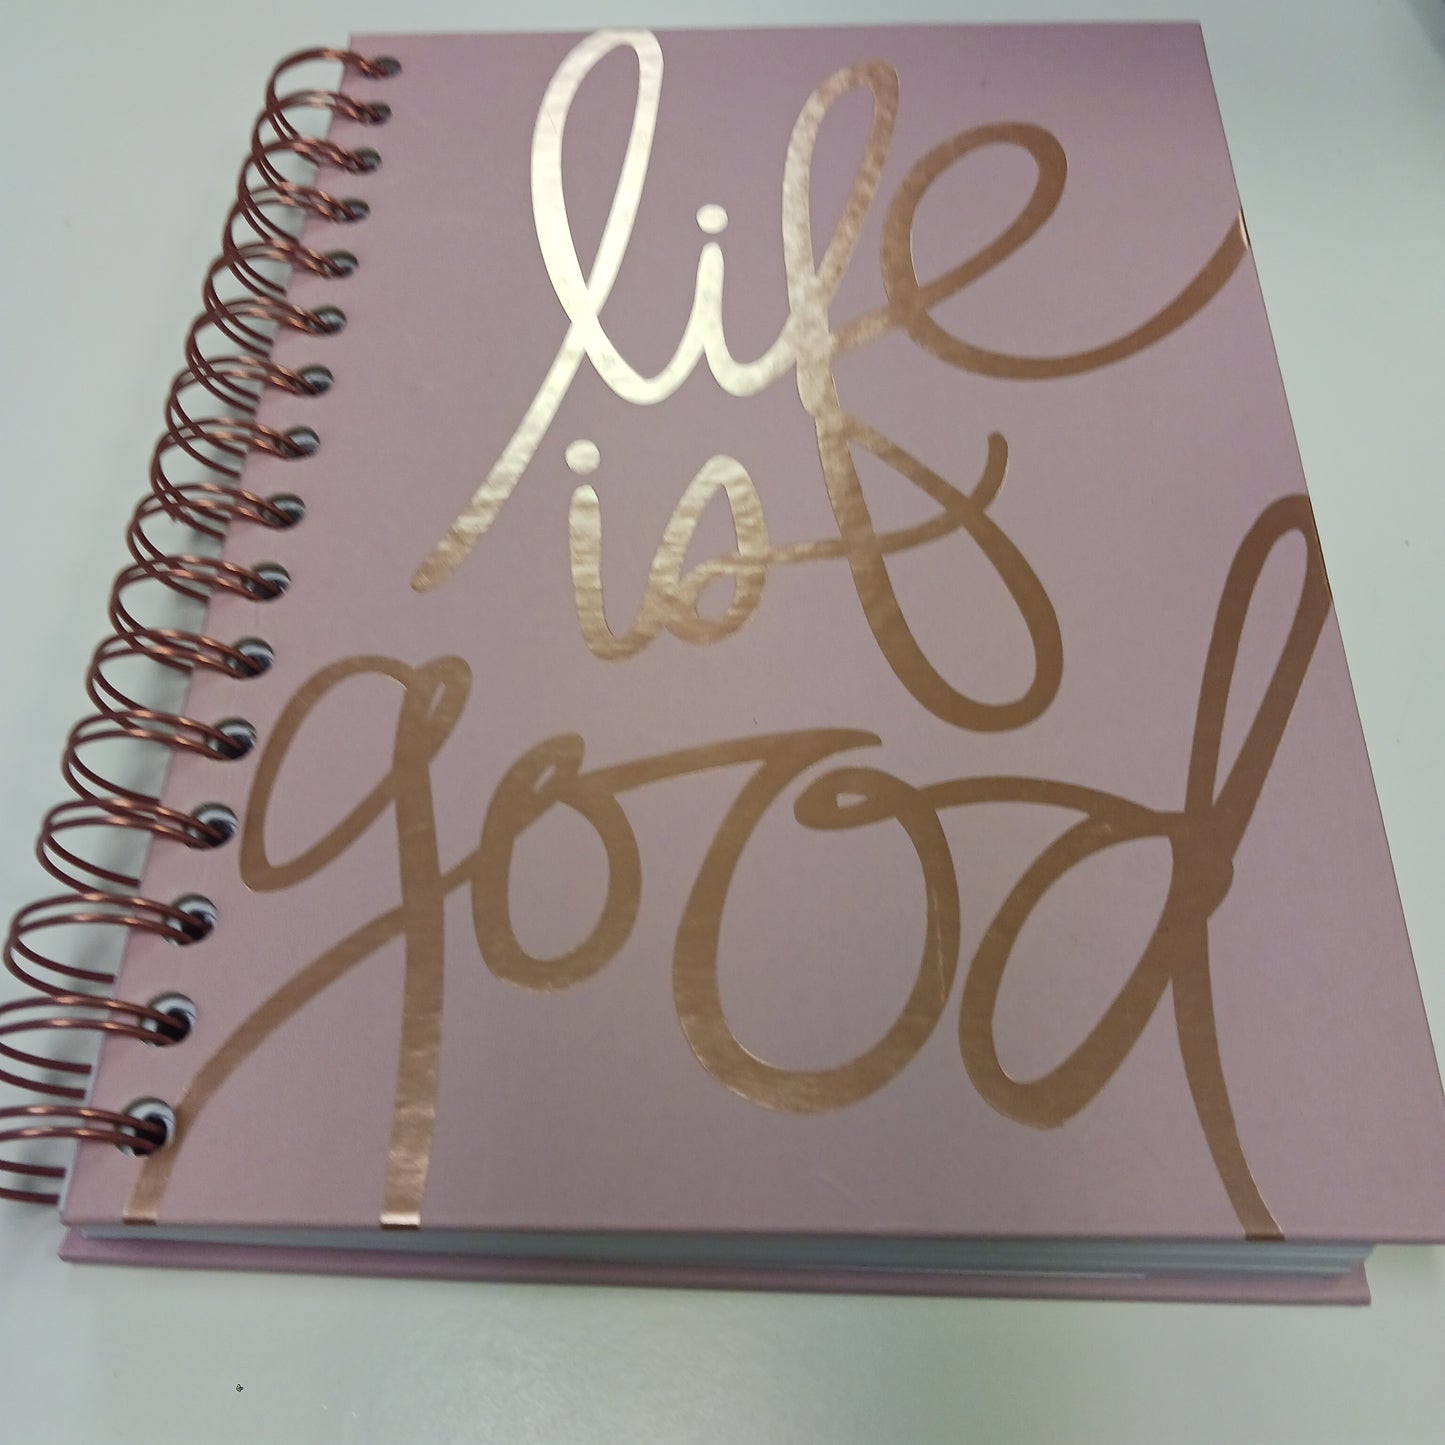 "Life is Good" journal